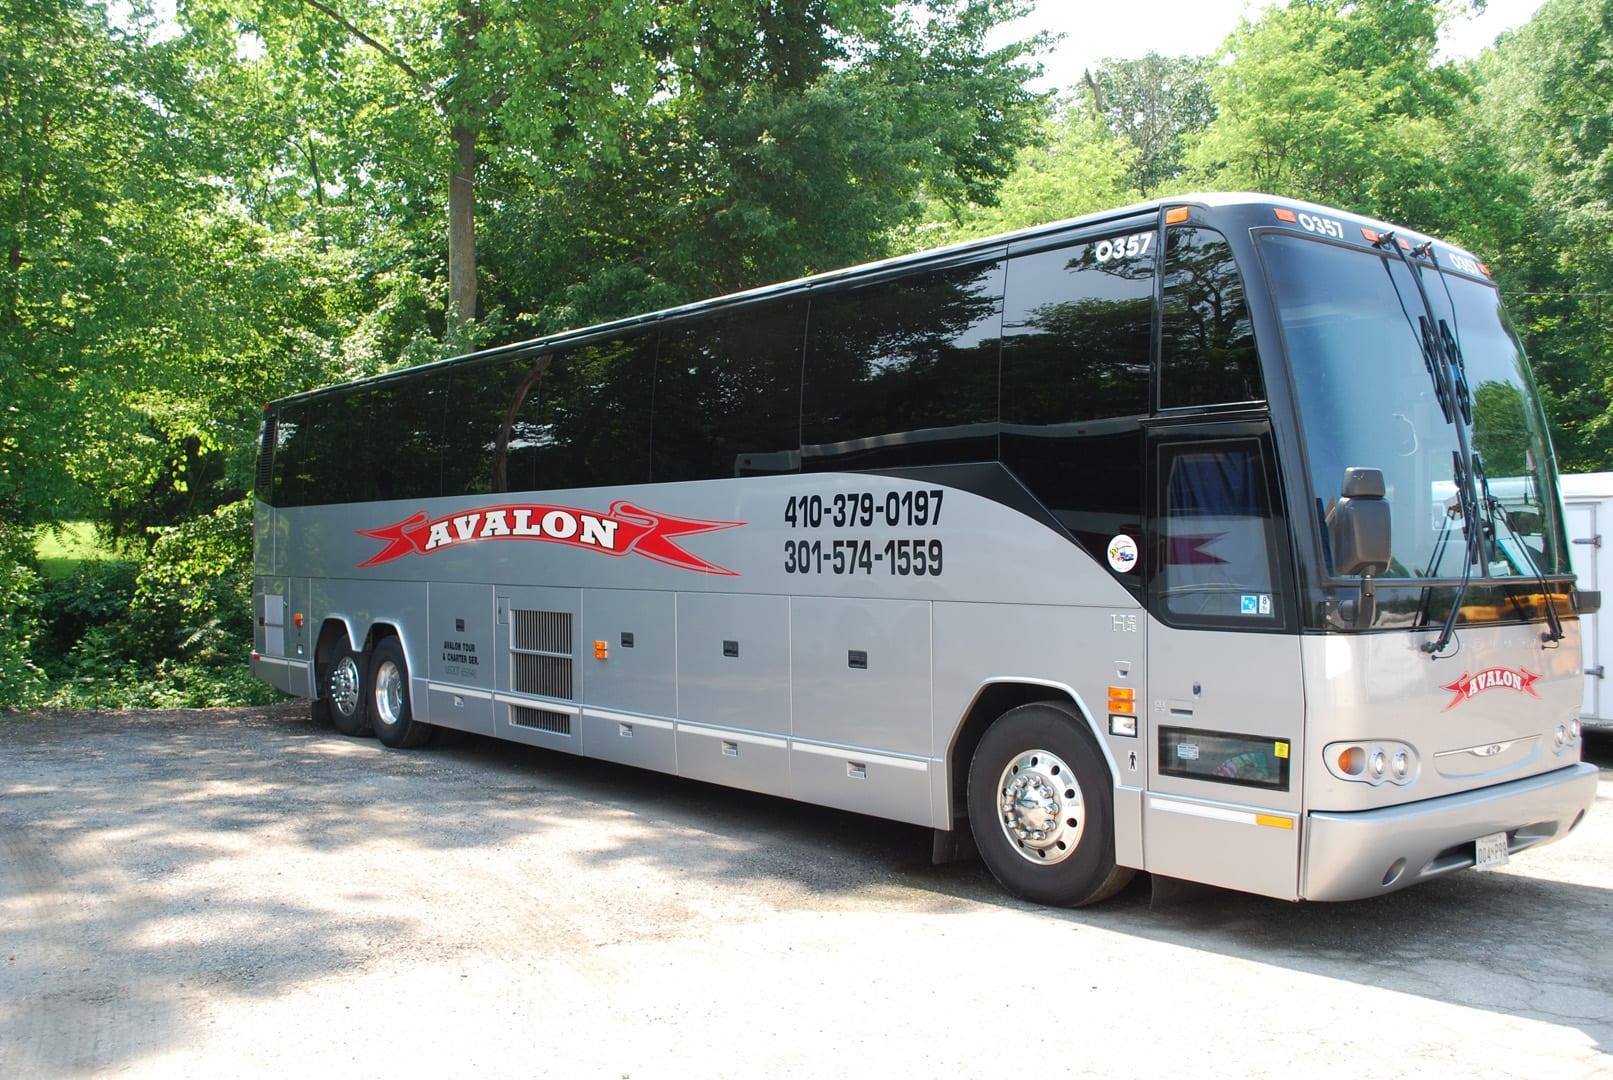 Avalon Tour and Charter Bus with Contact Numbers